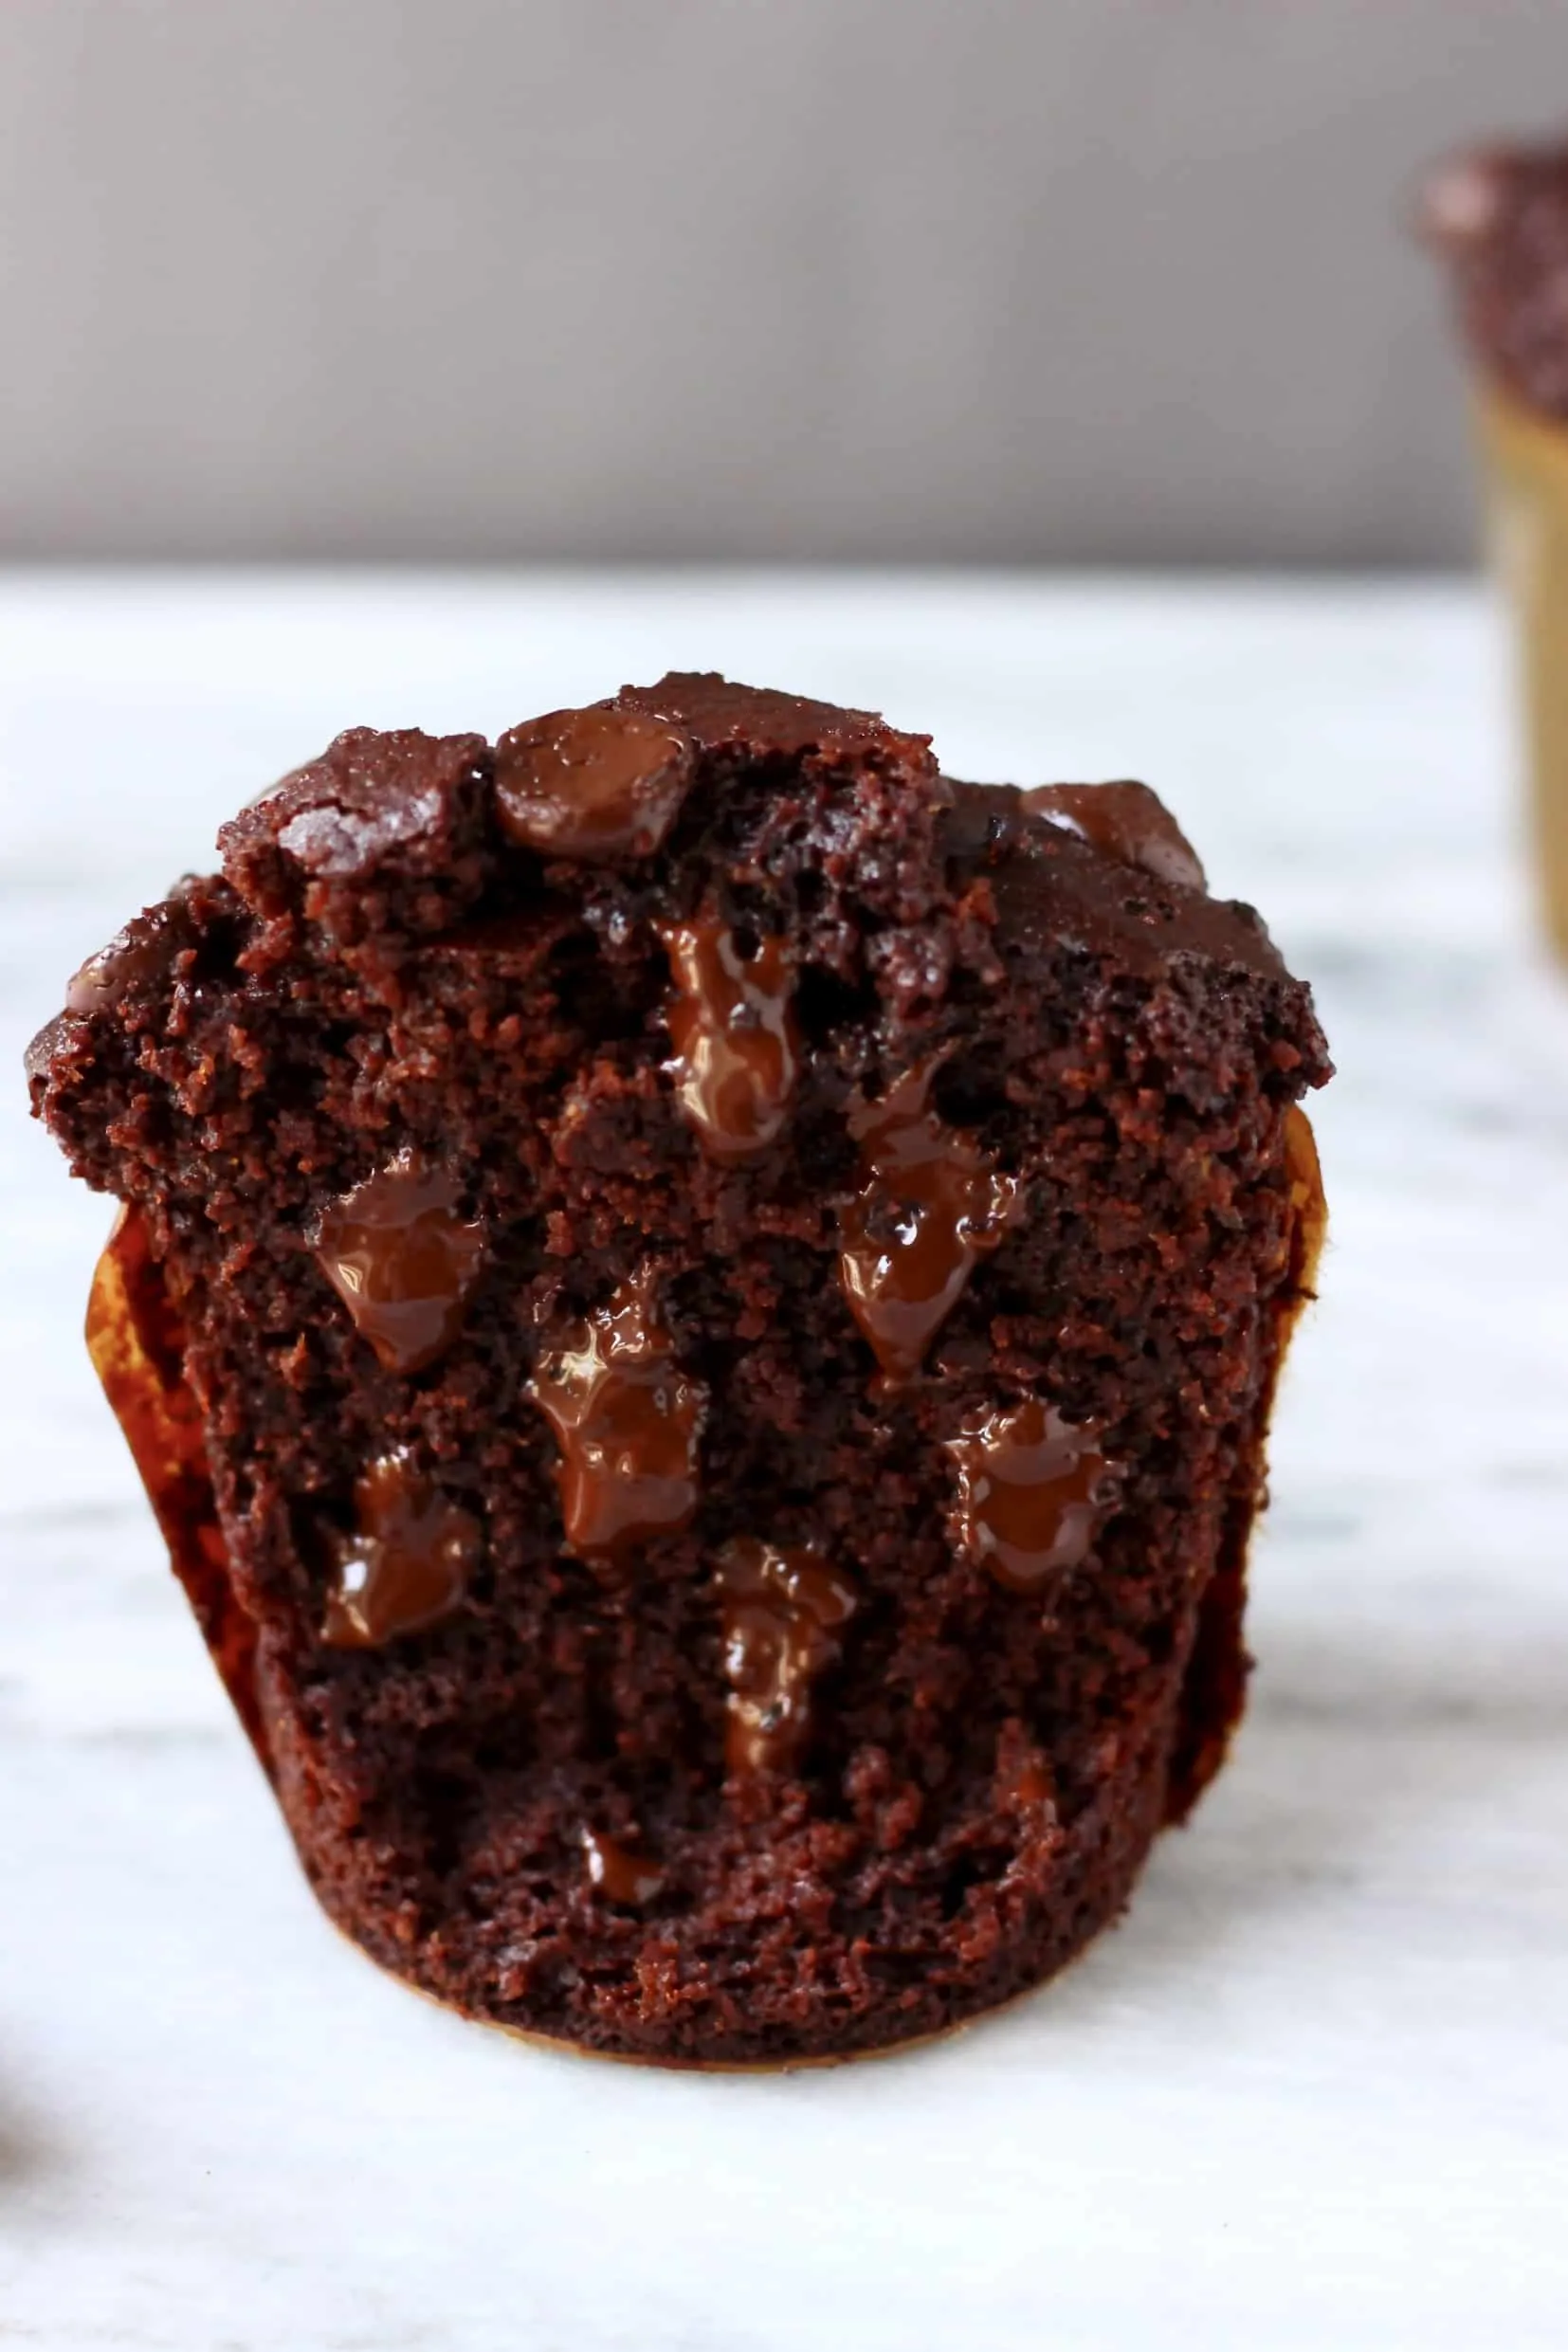 A gluten-free vegan chocolate zucchini muffin cut in half with melted chocolate chips inside